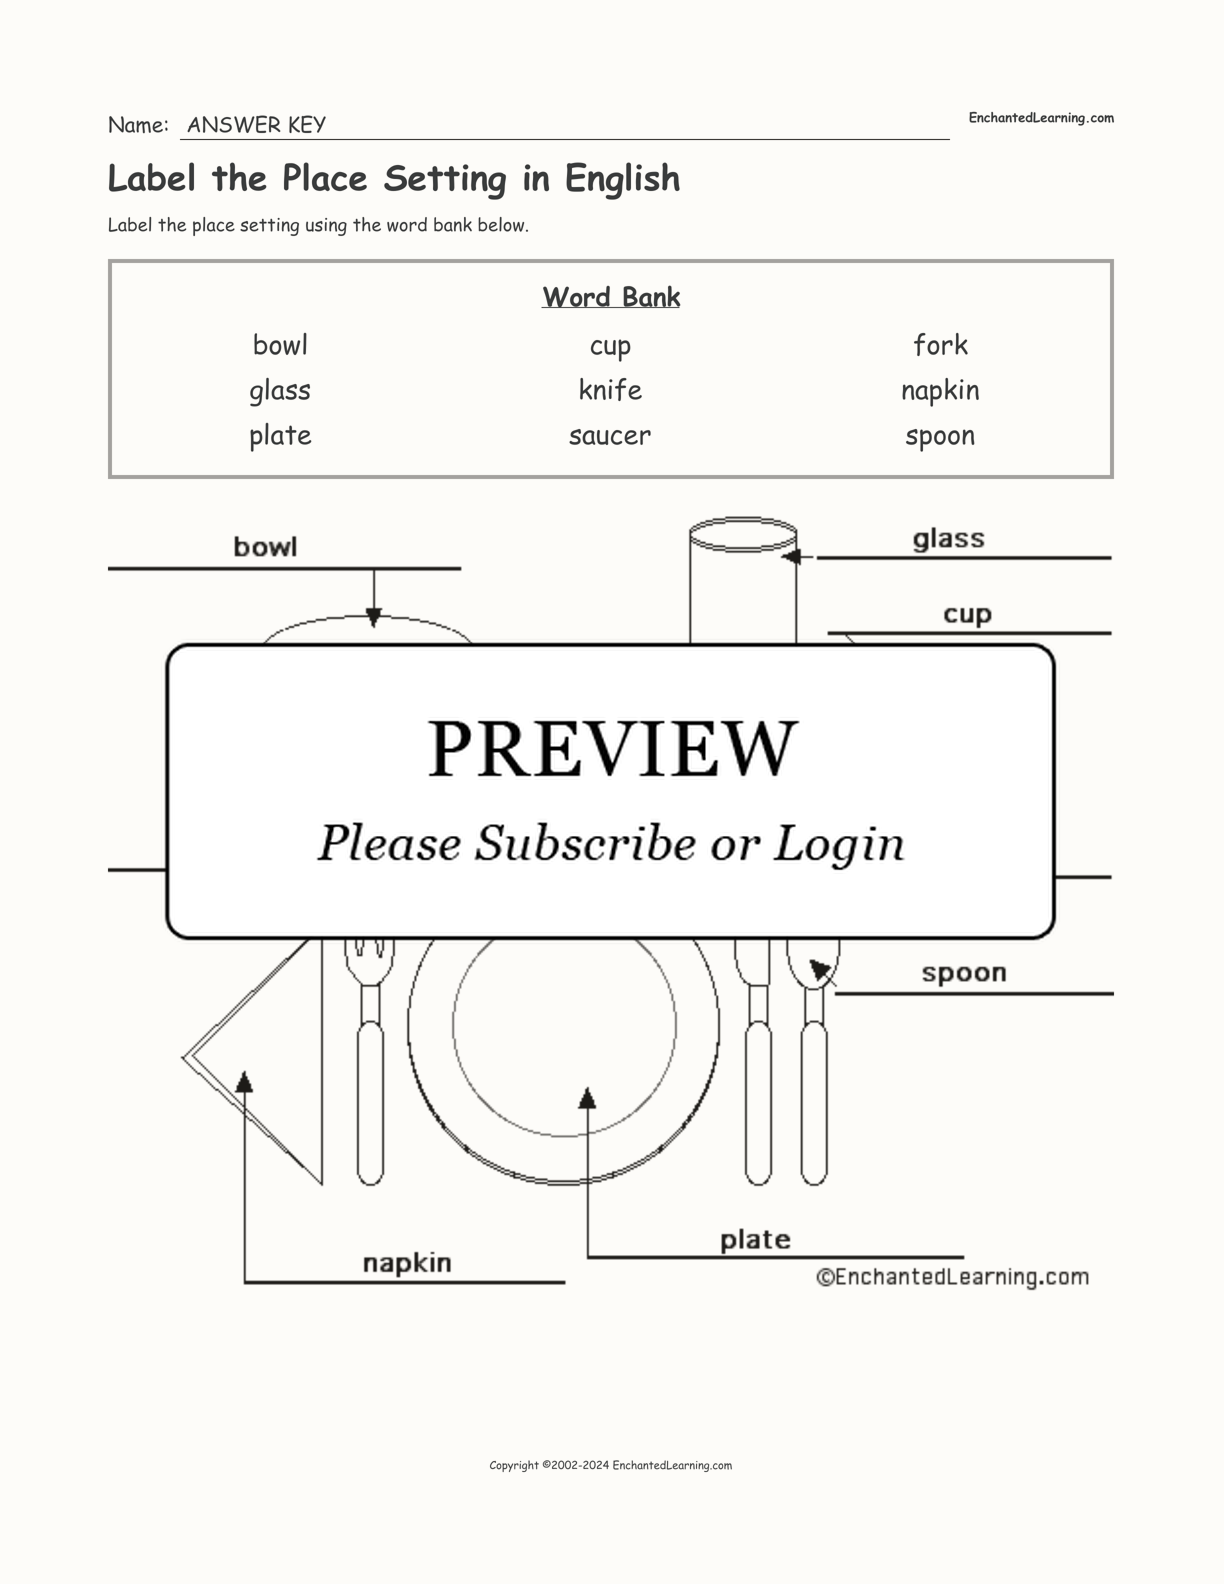 Label the Place Setting in English interactive worksheet page 2